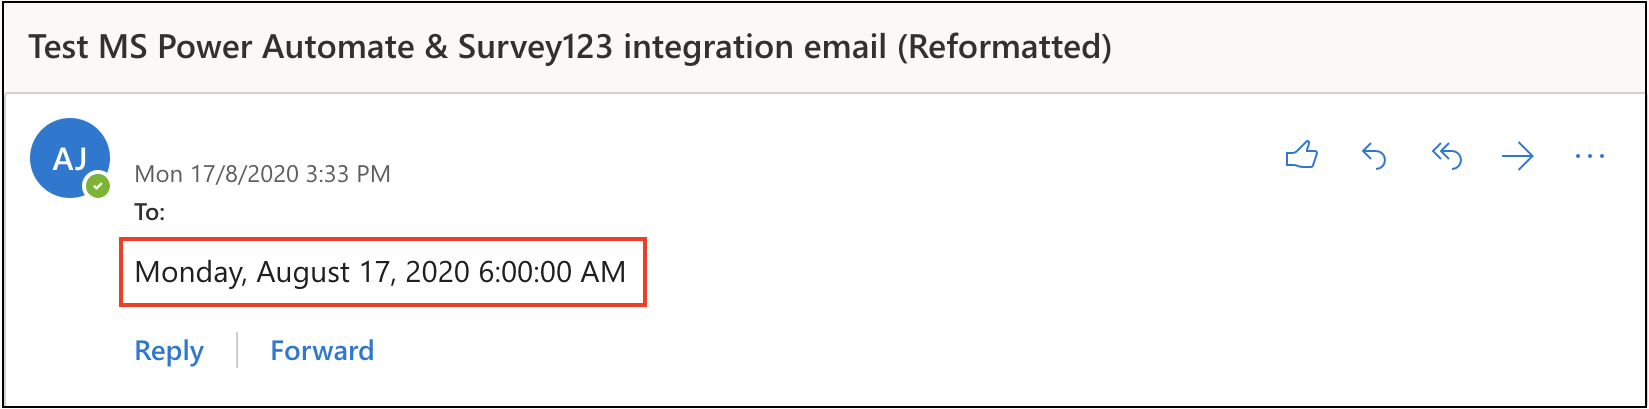 Image showing the email notification using MS Power Automate.